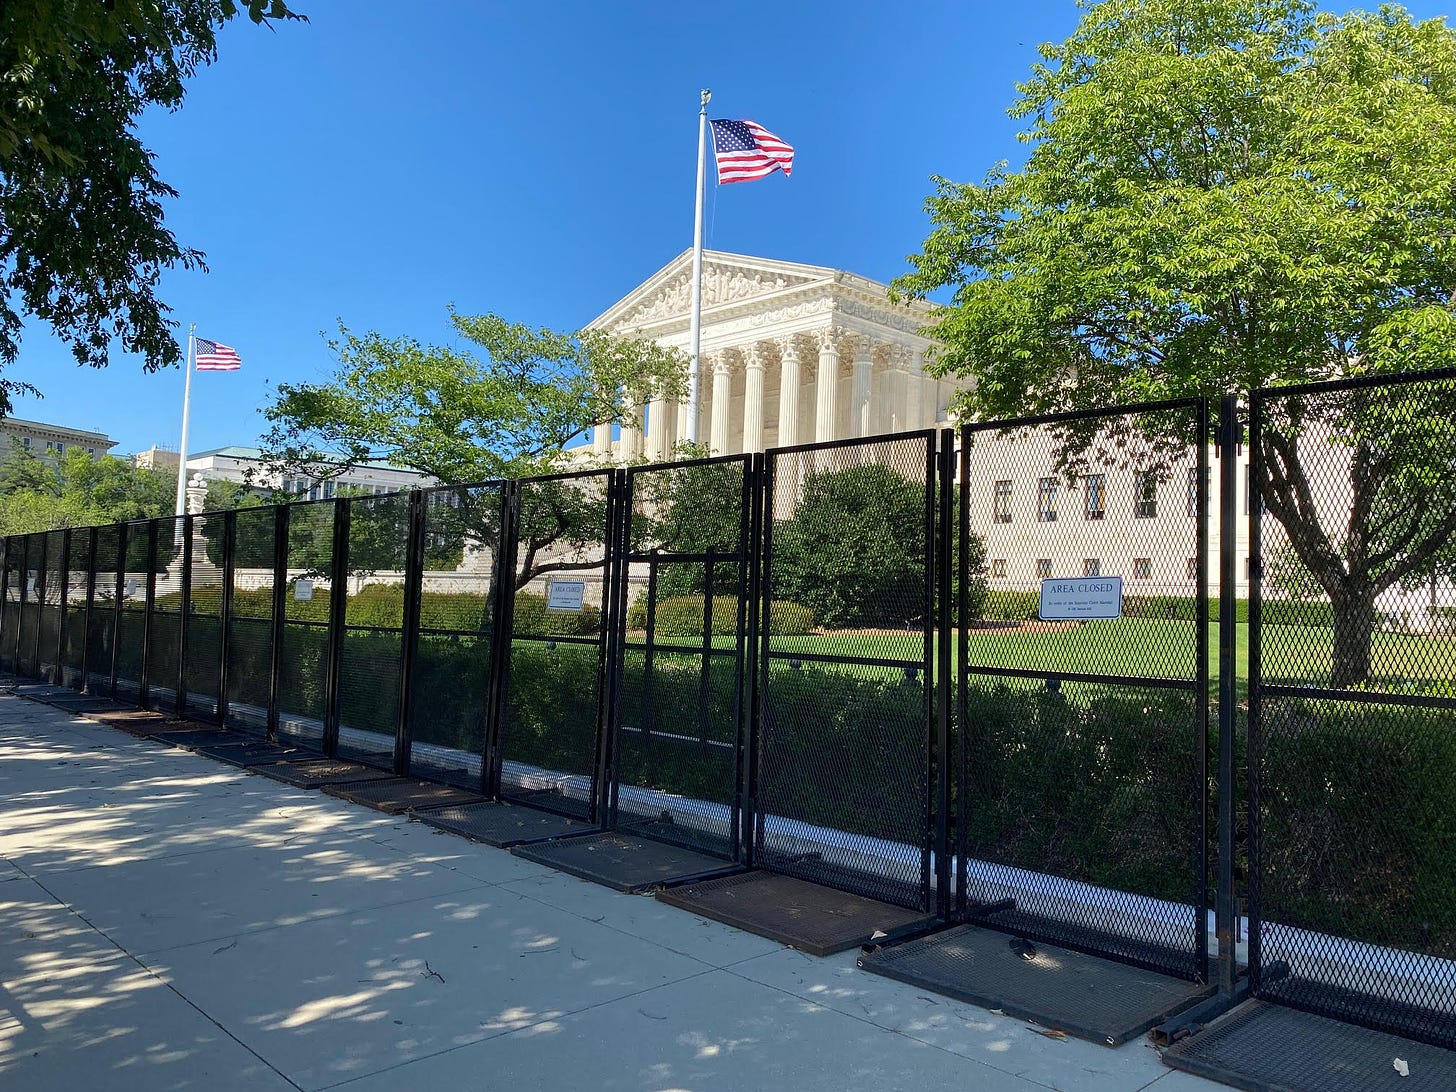 The Supreme Court building, behind a tall black fence that surrounds the grounds.